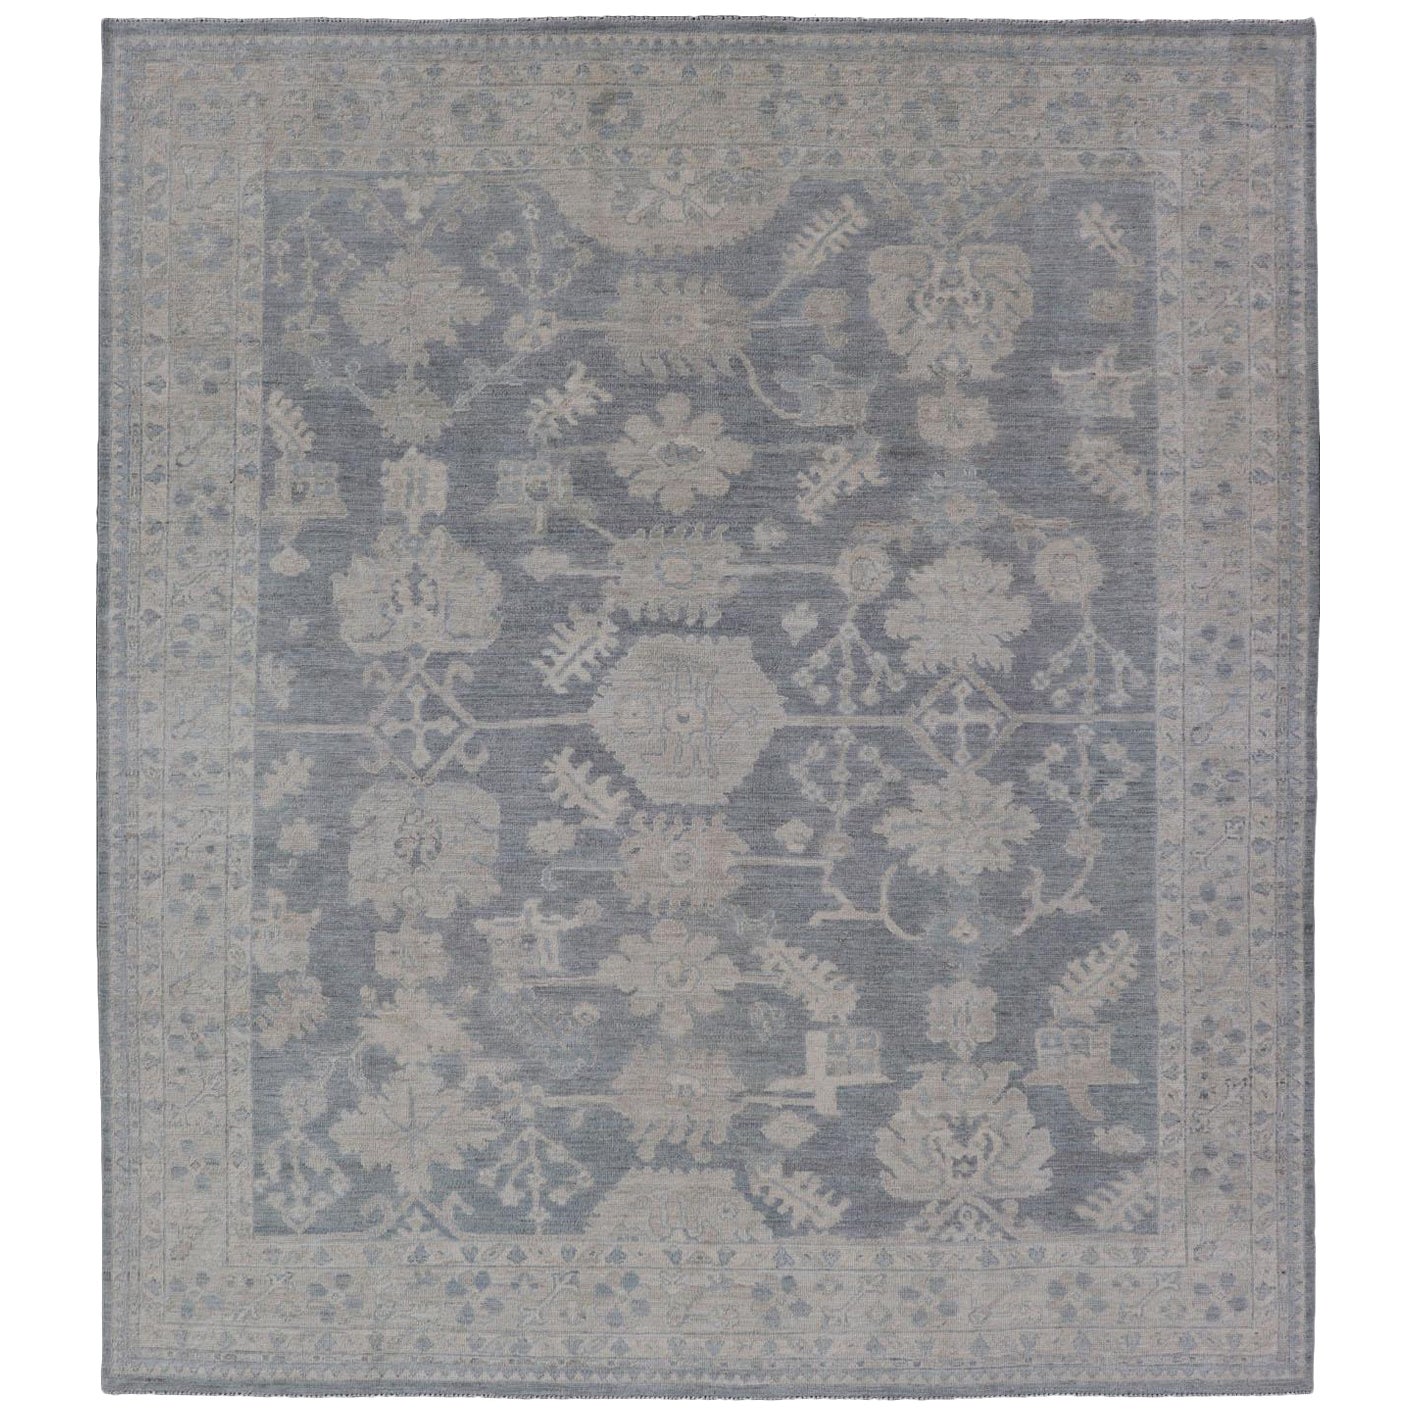 Modern Oushak with Large Floral Motifs with Cream, Blue, and Steel Blue For Sale